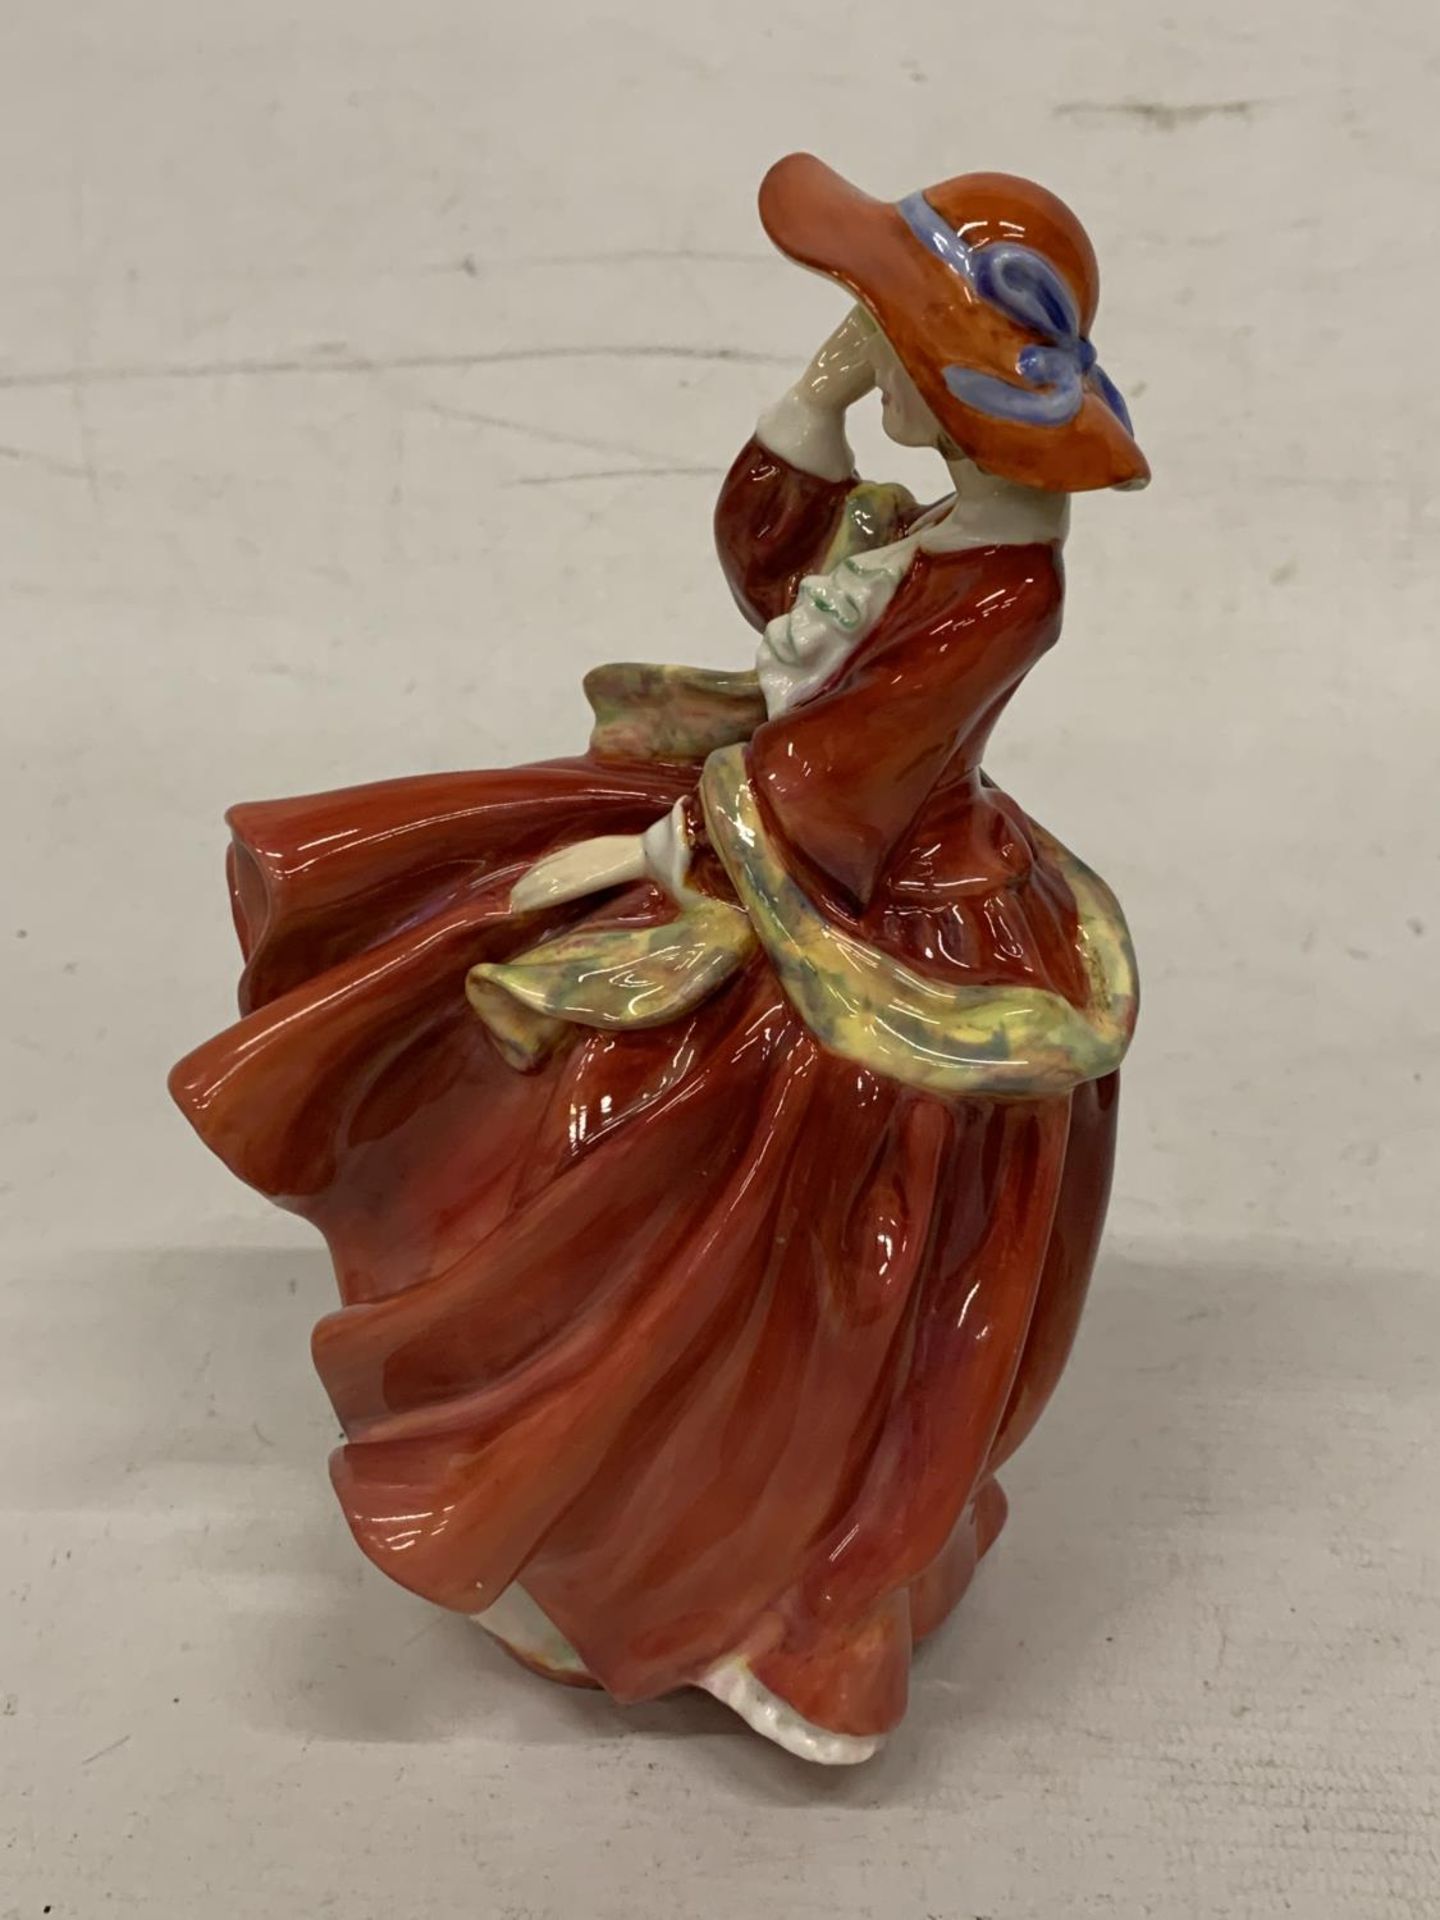 A ROYAL DOULTON FIGURINE "TOP O' THE HILL" HN 1834 - Image 2 of 5